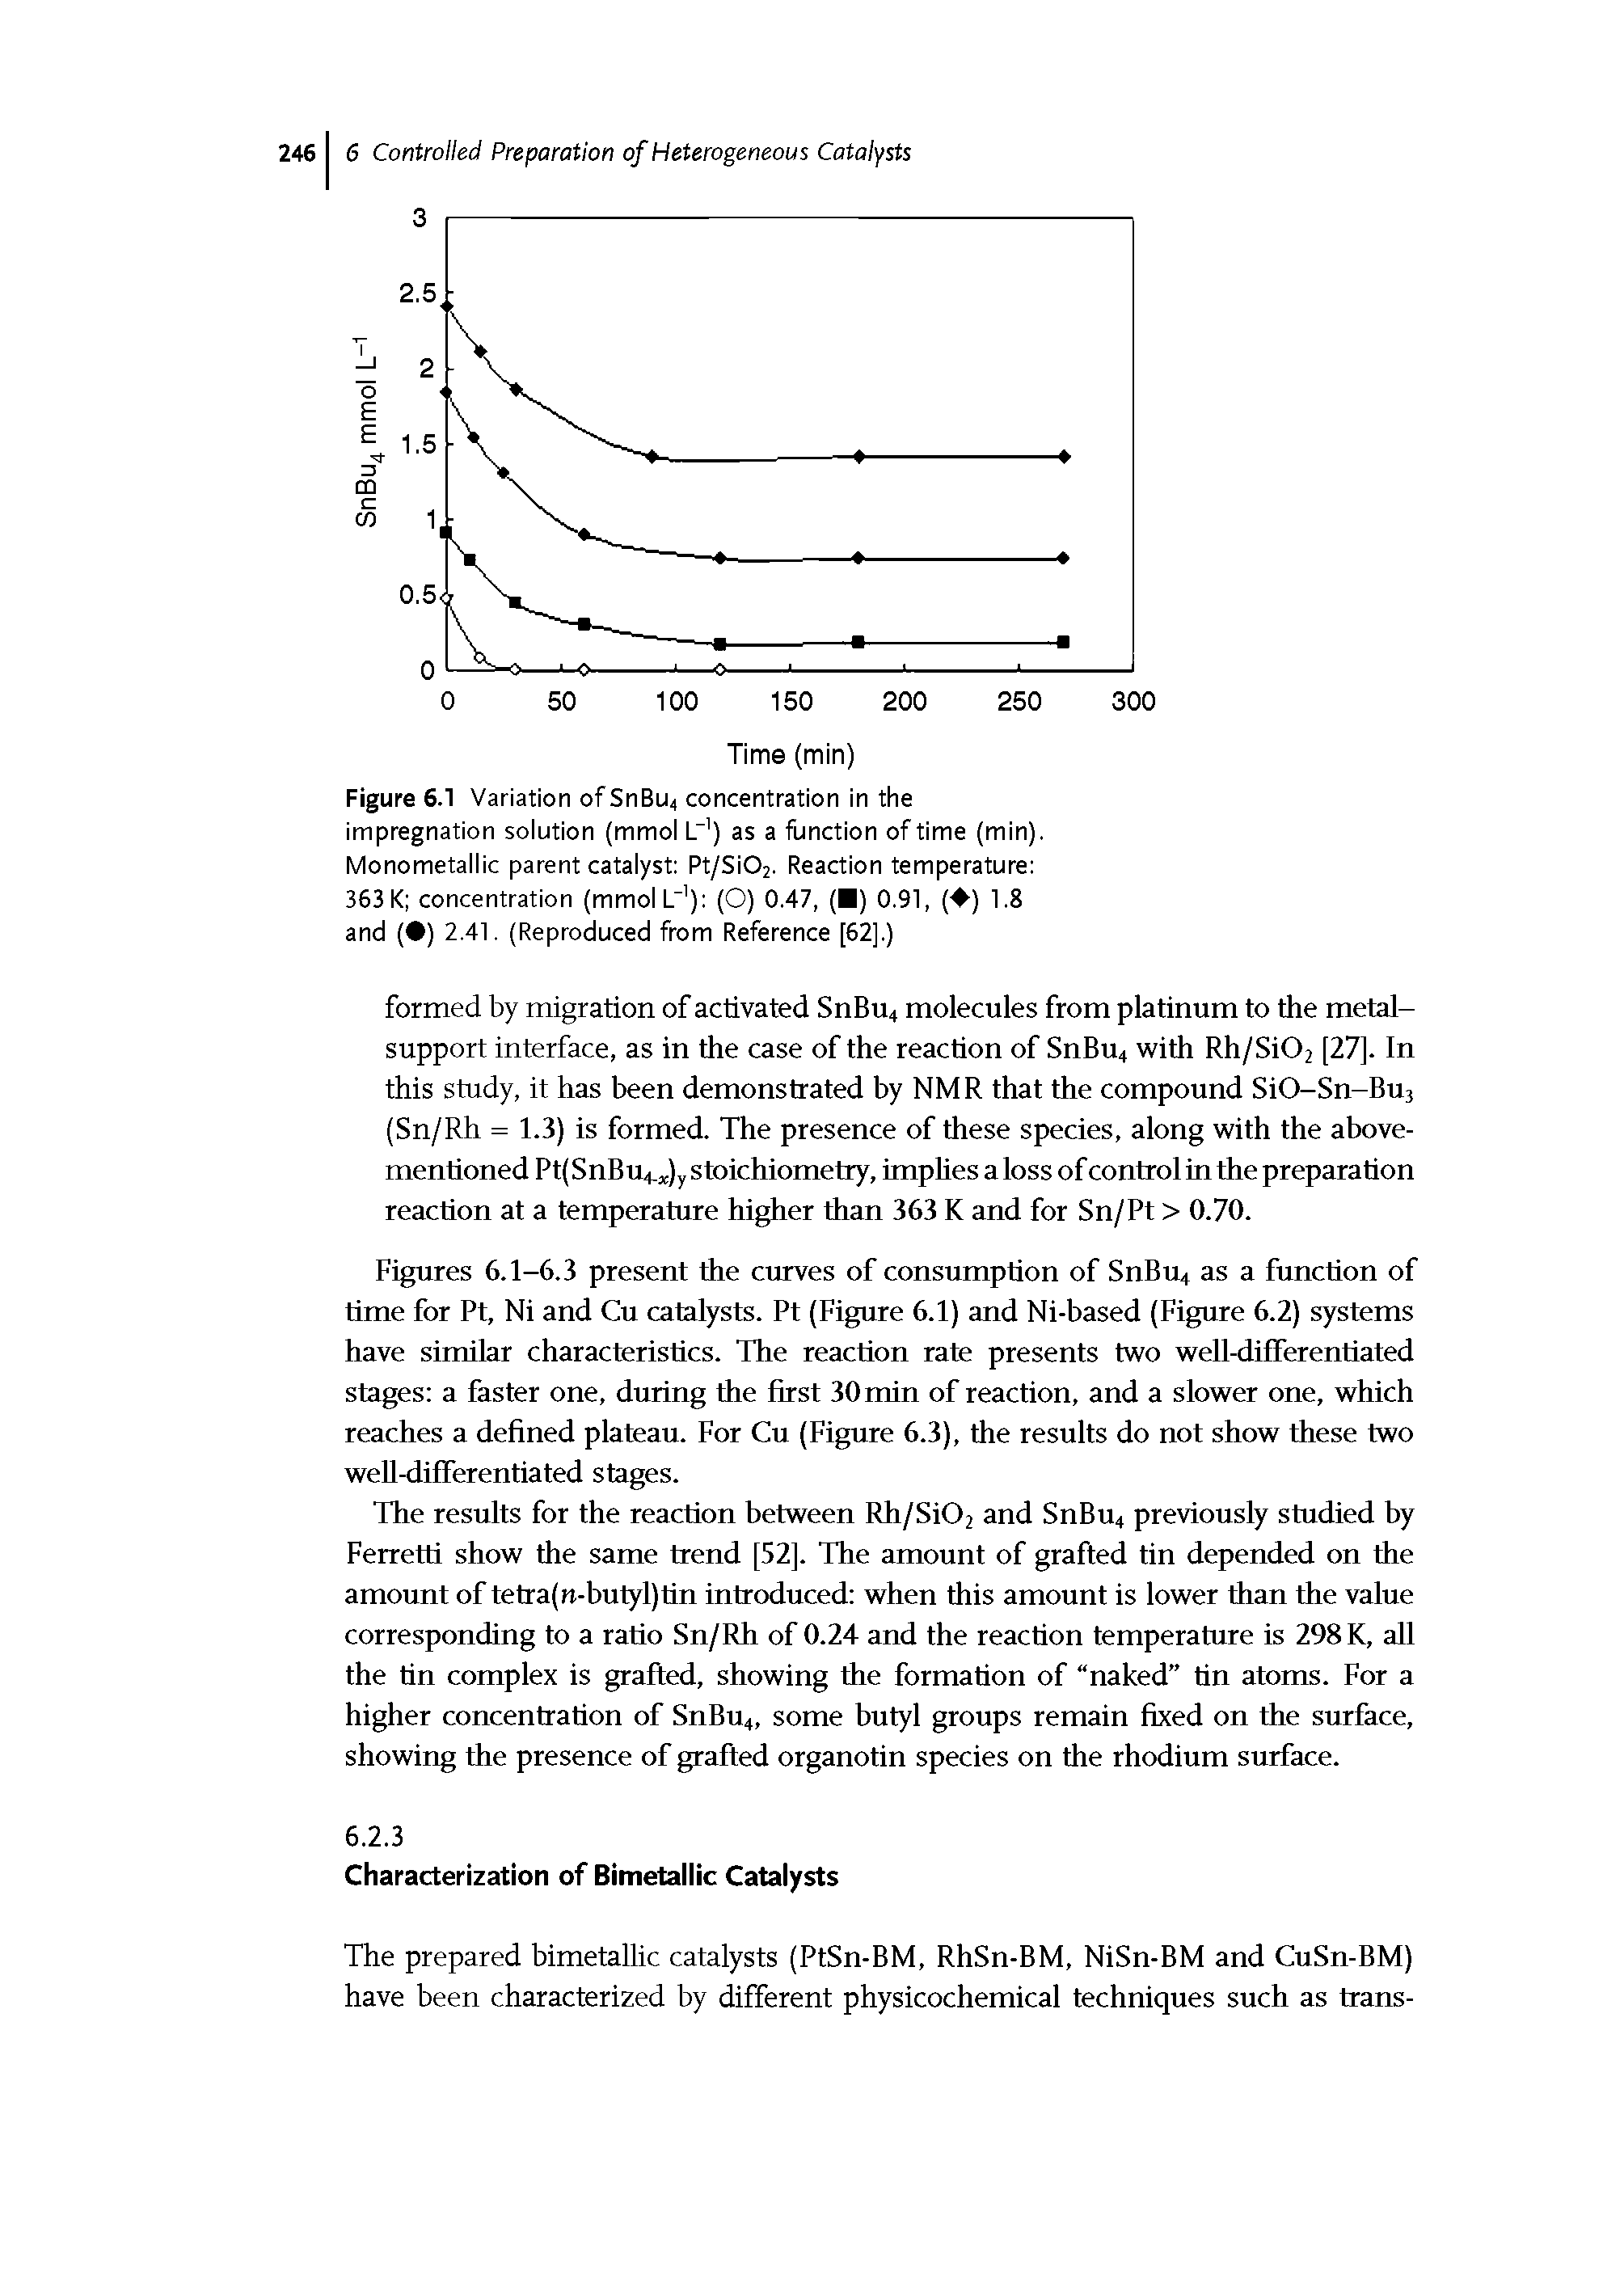 Figures 6.1-6.3 present the curves of consumption of SnBu4 as a function of time for Pt, Ni and Cu catalysts. Pt (Figure 6.1) and Ni-based (Figure 6.2) systems have similar characteristics. The reaction rate presents two well-differentiated stages a faster one, during the first 30 min of reaction, and a slower one, which reaches a defined plateau. For Cu (Figure 6.3), the results do not show these two weU-differentiated stages.